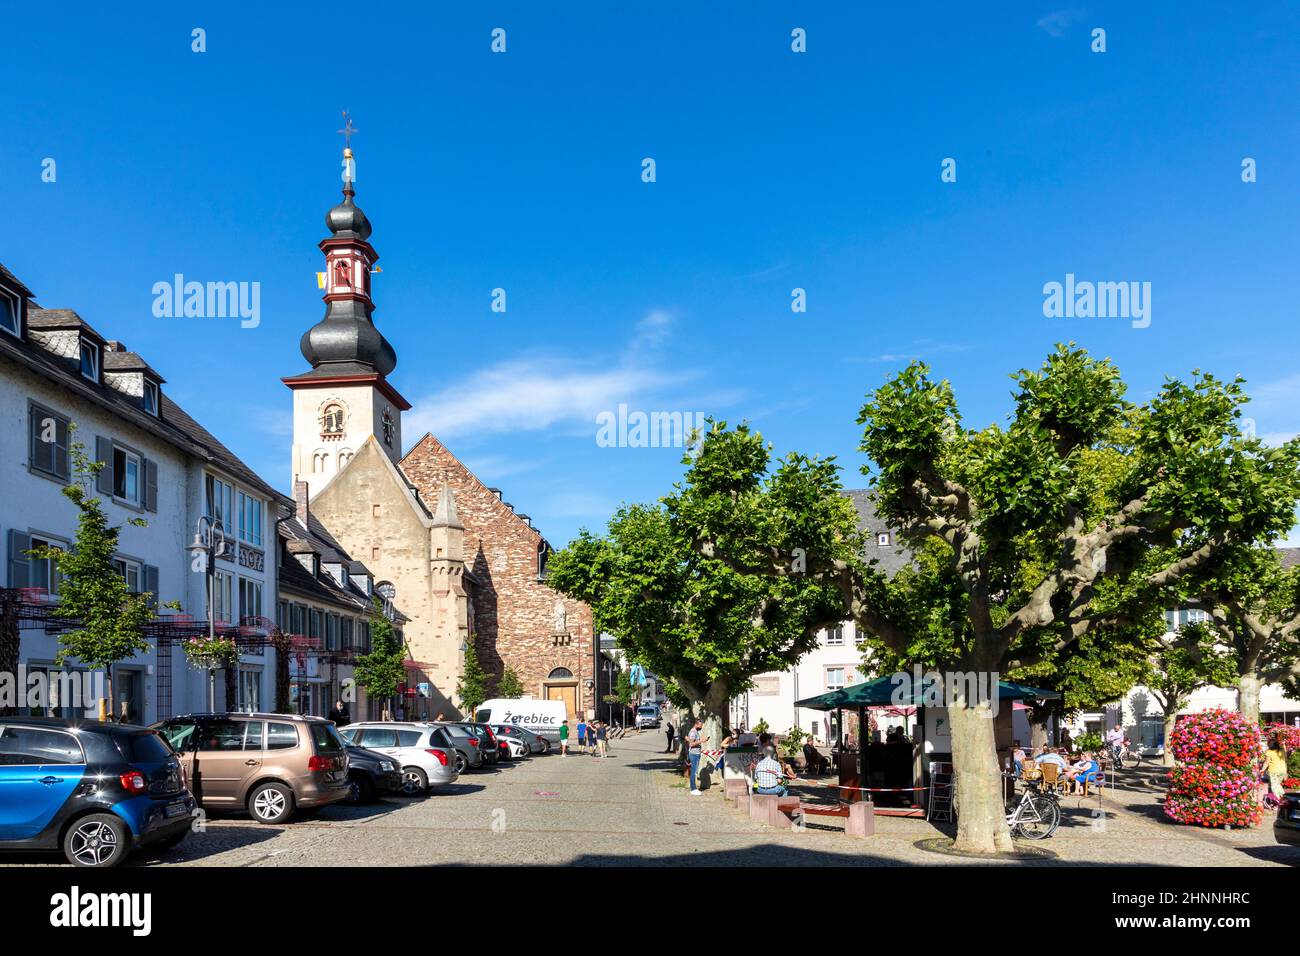 scenic view to place in the historic touristic part of Ruedesheim, Germany Stock Photo